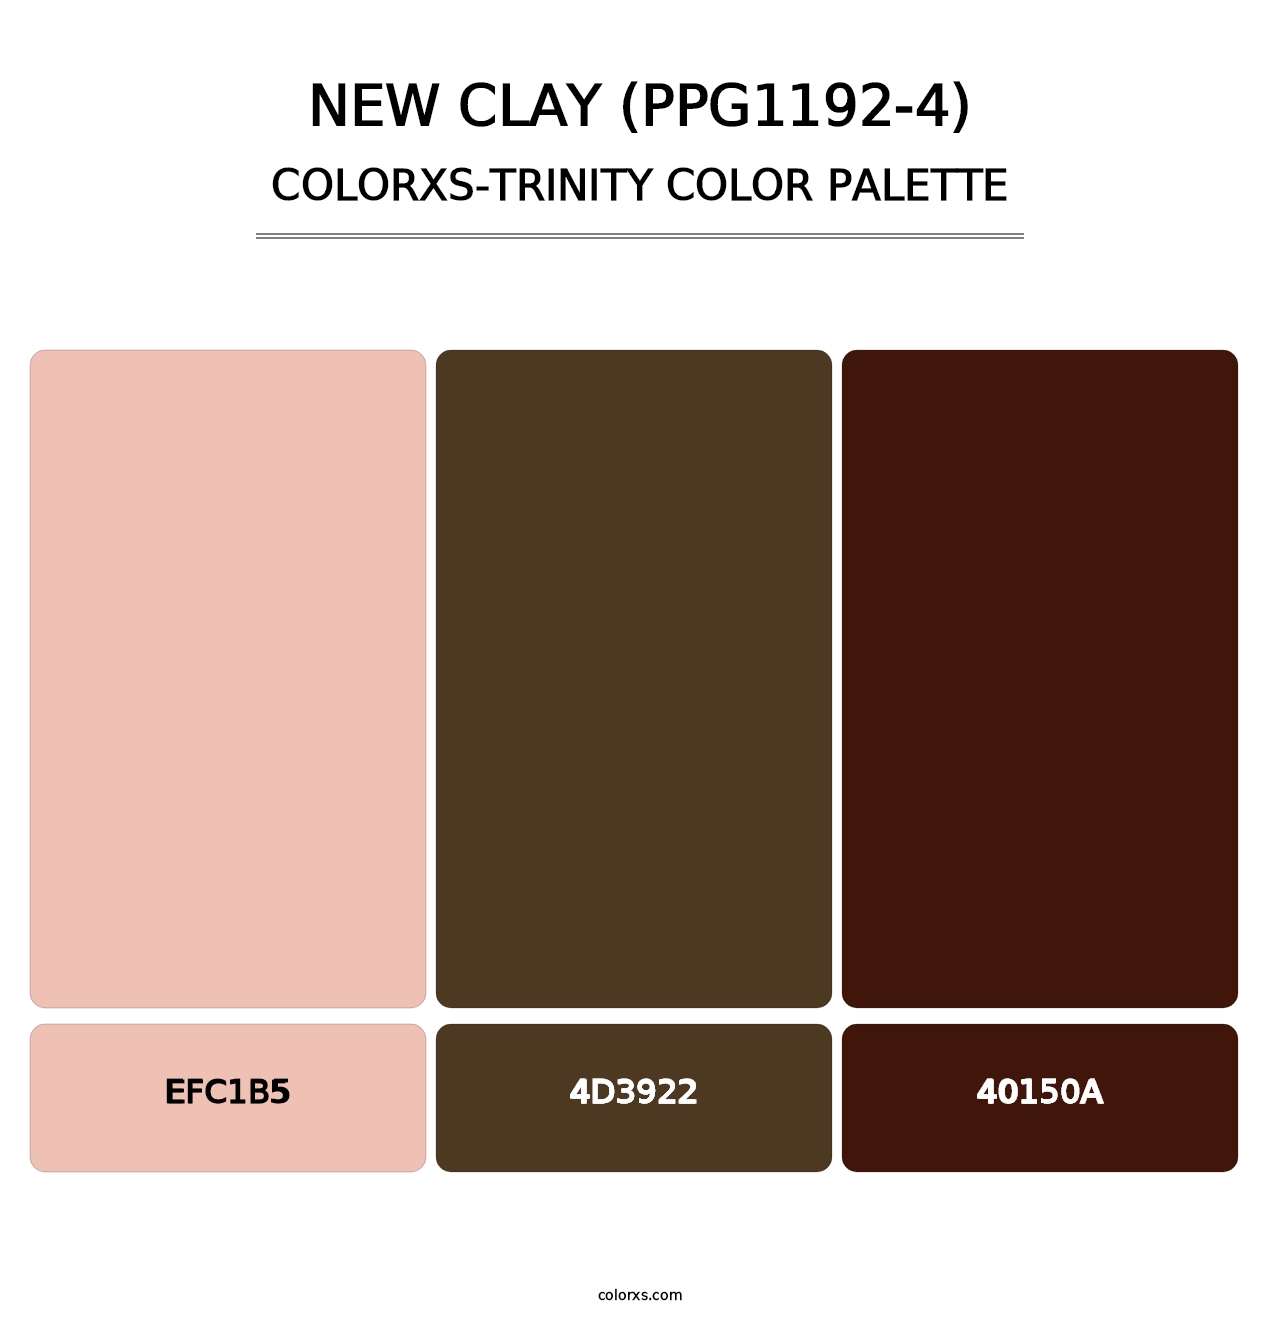 New Clay (PPG1192-4) - Colorxs Trinity Palette